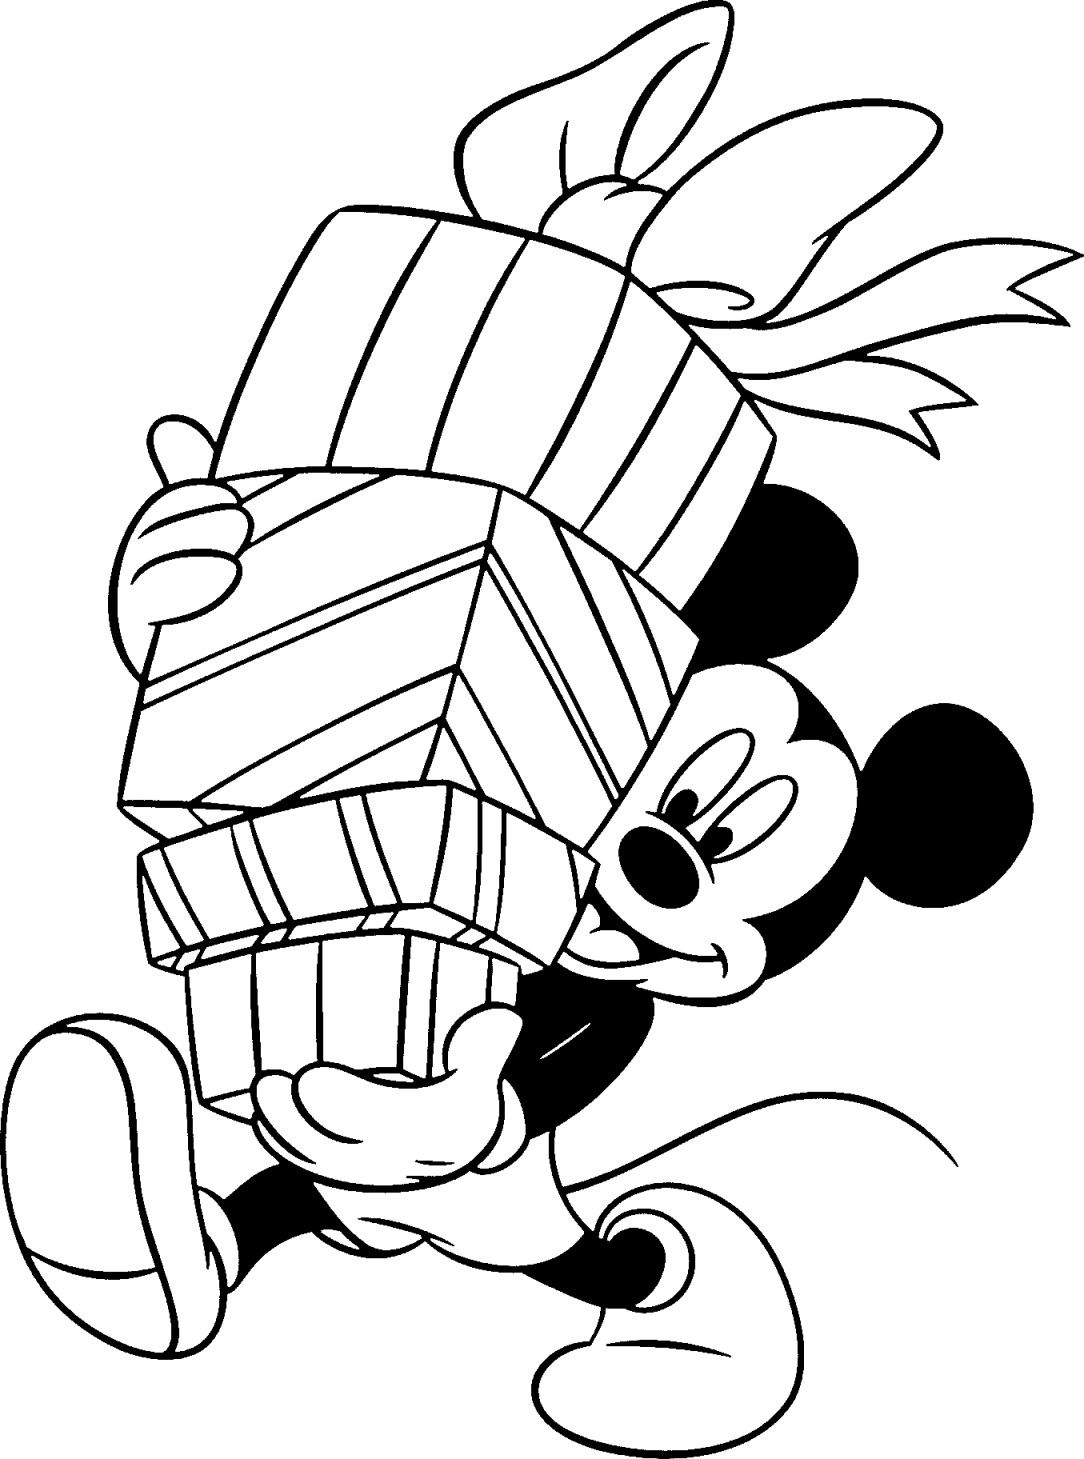 Mickey Mouse Coloring Pages Free To Print